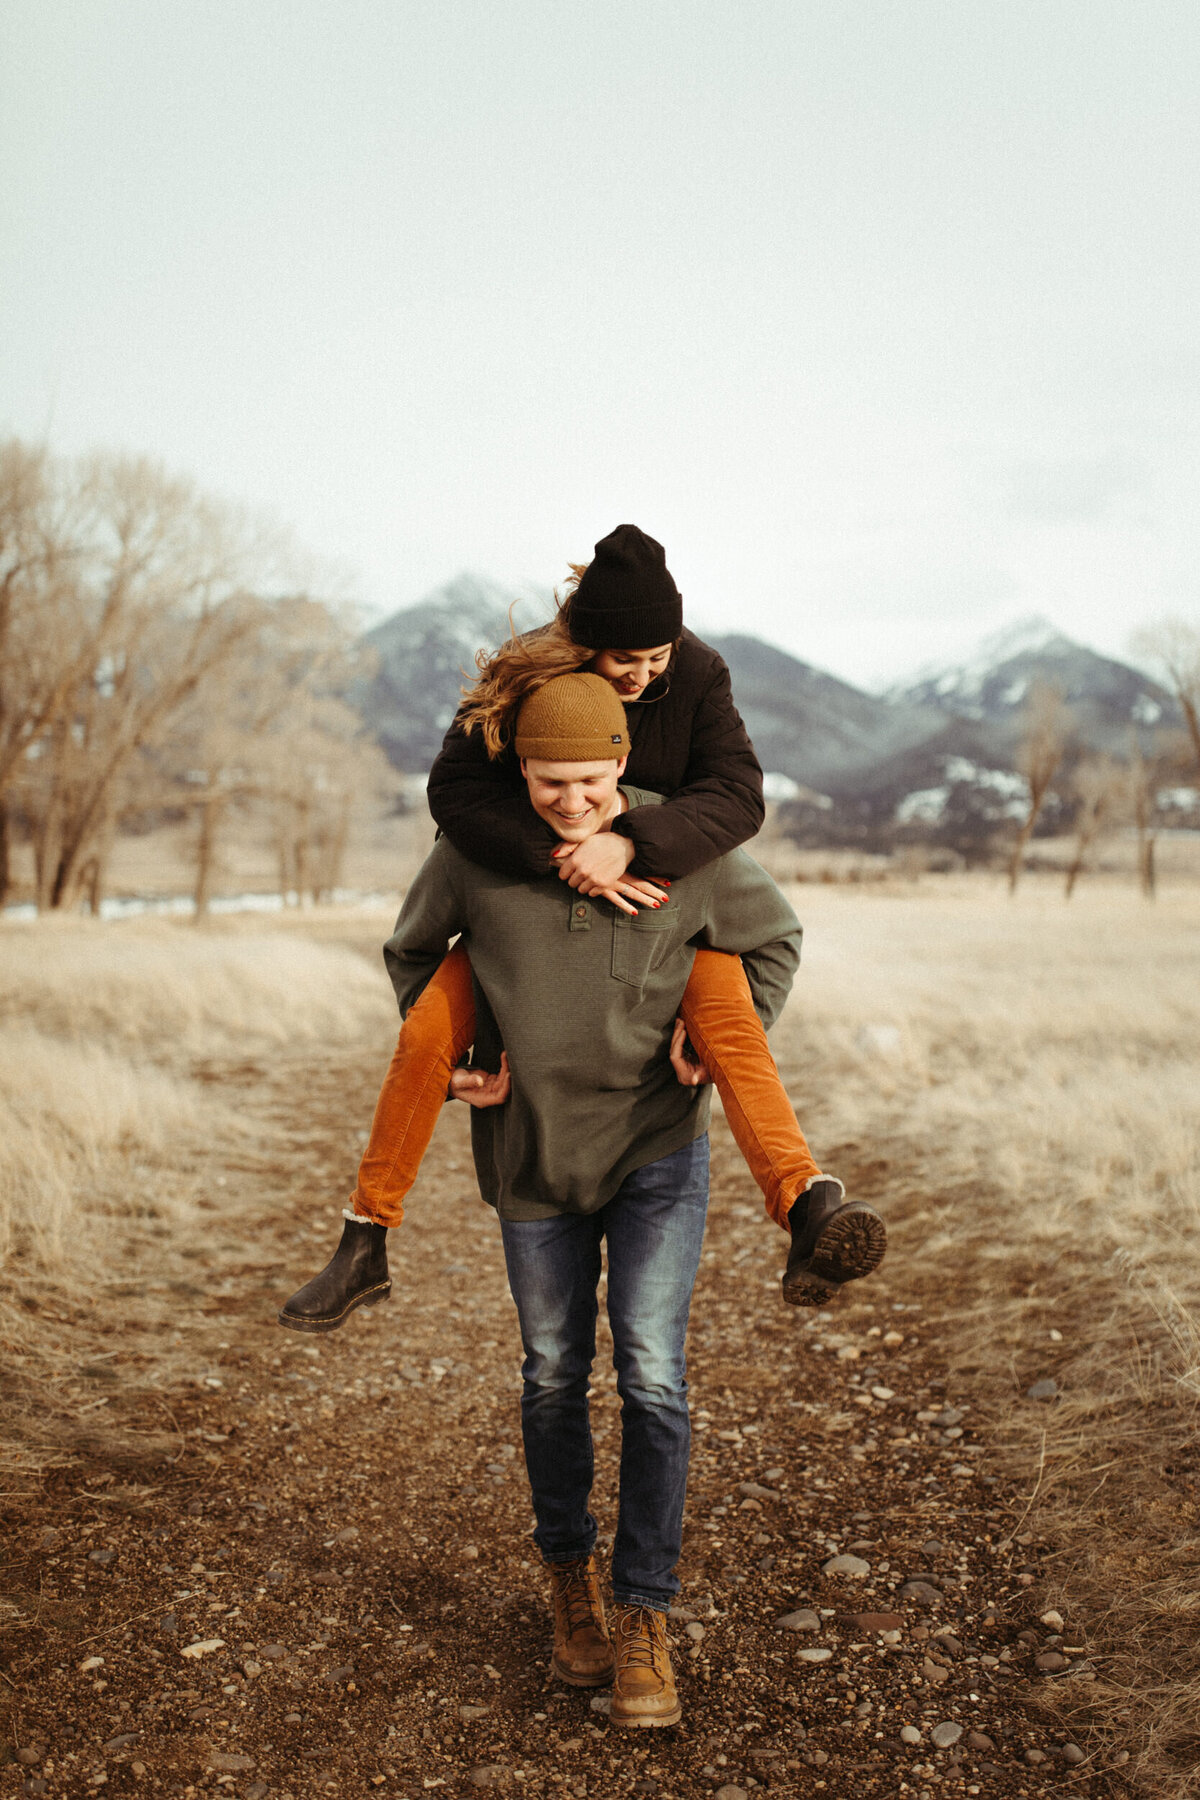 Guy giving his girl a piggy back ride down a trail with mountains in the background on a cold winter day